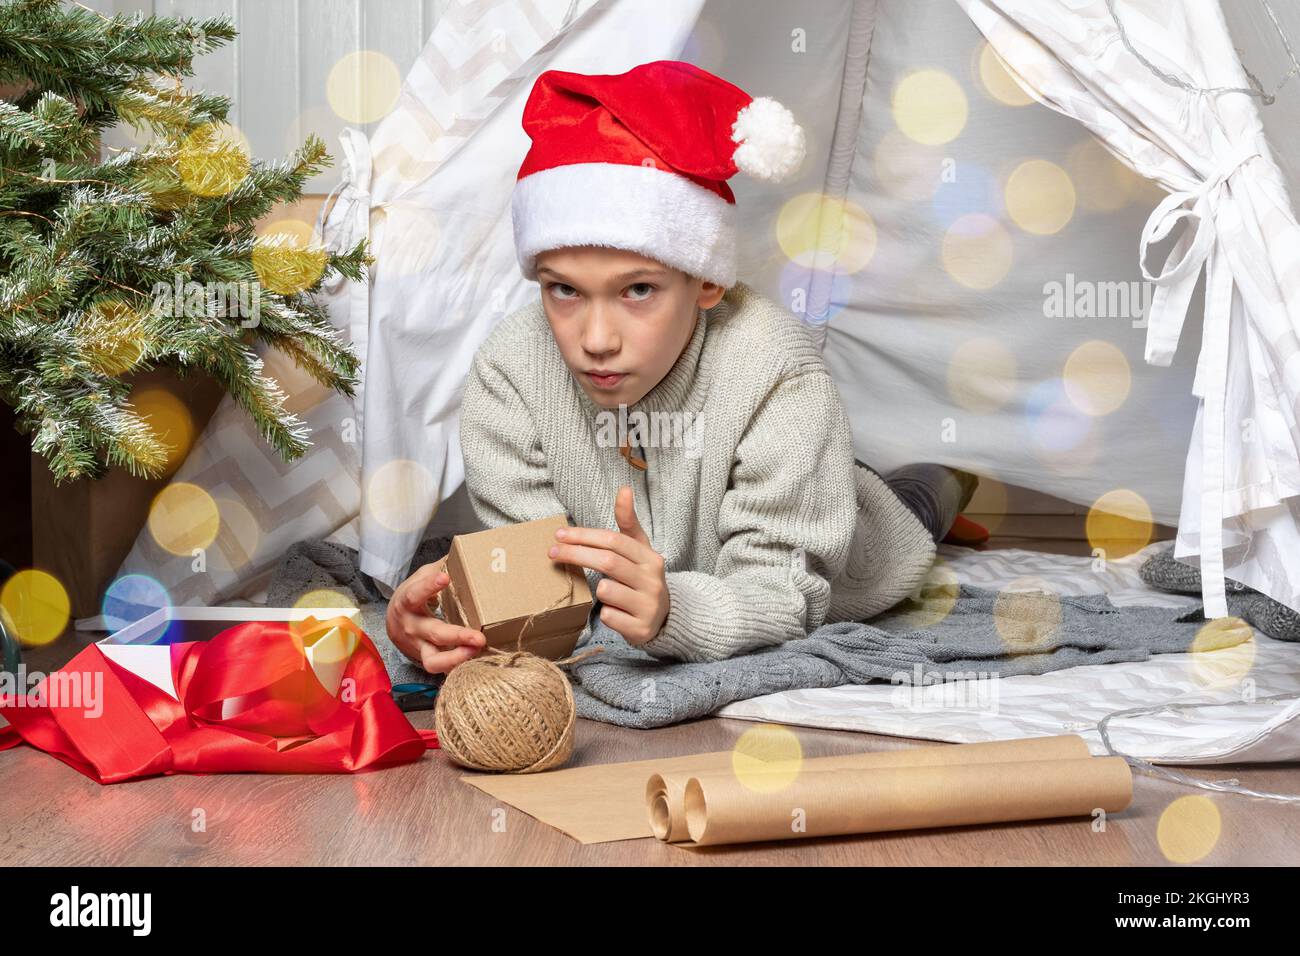 A child in a red Santa hat wraps Christmas gifts surprises in kraft paper with a rope, red ribbons. A boy lying in a children's tent packs gifts for t Stock Photo